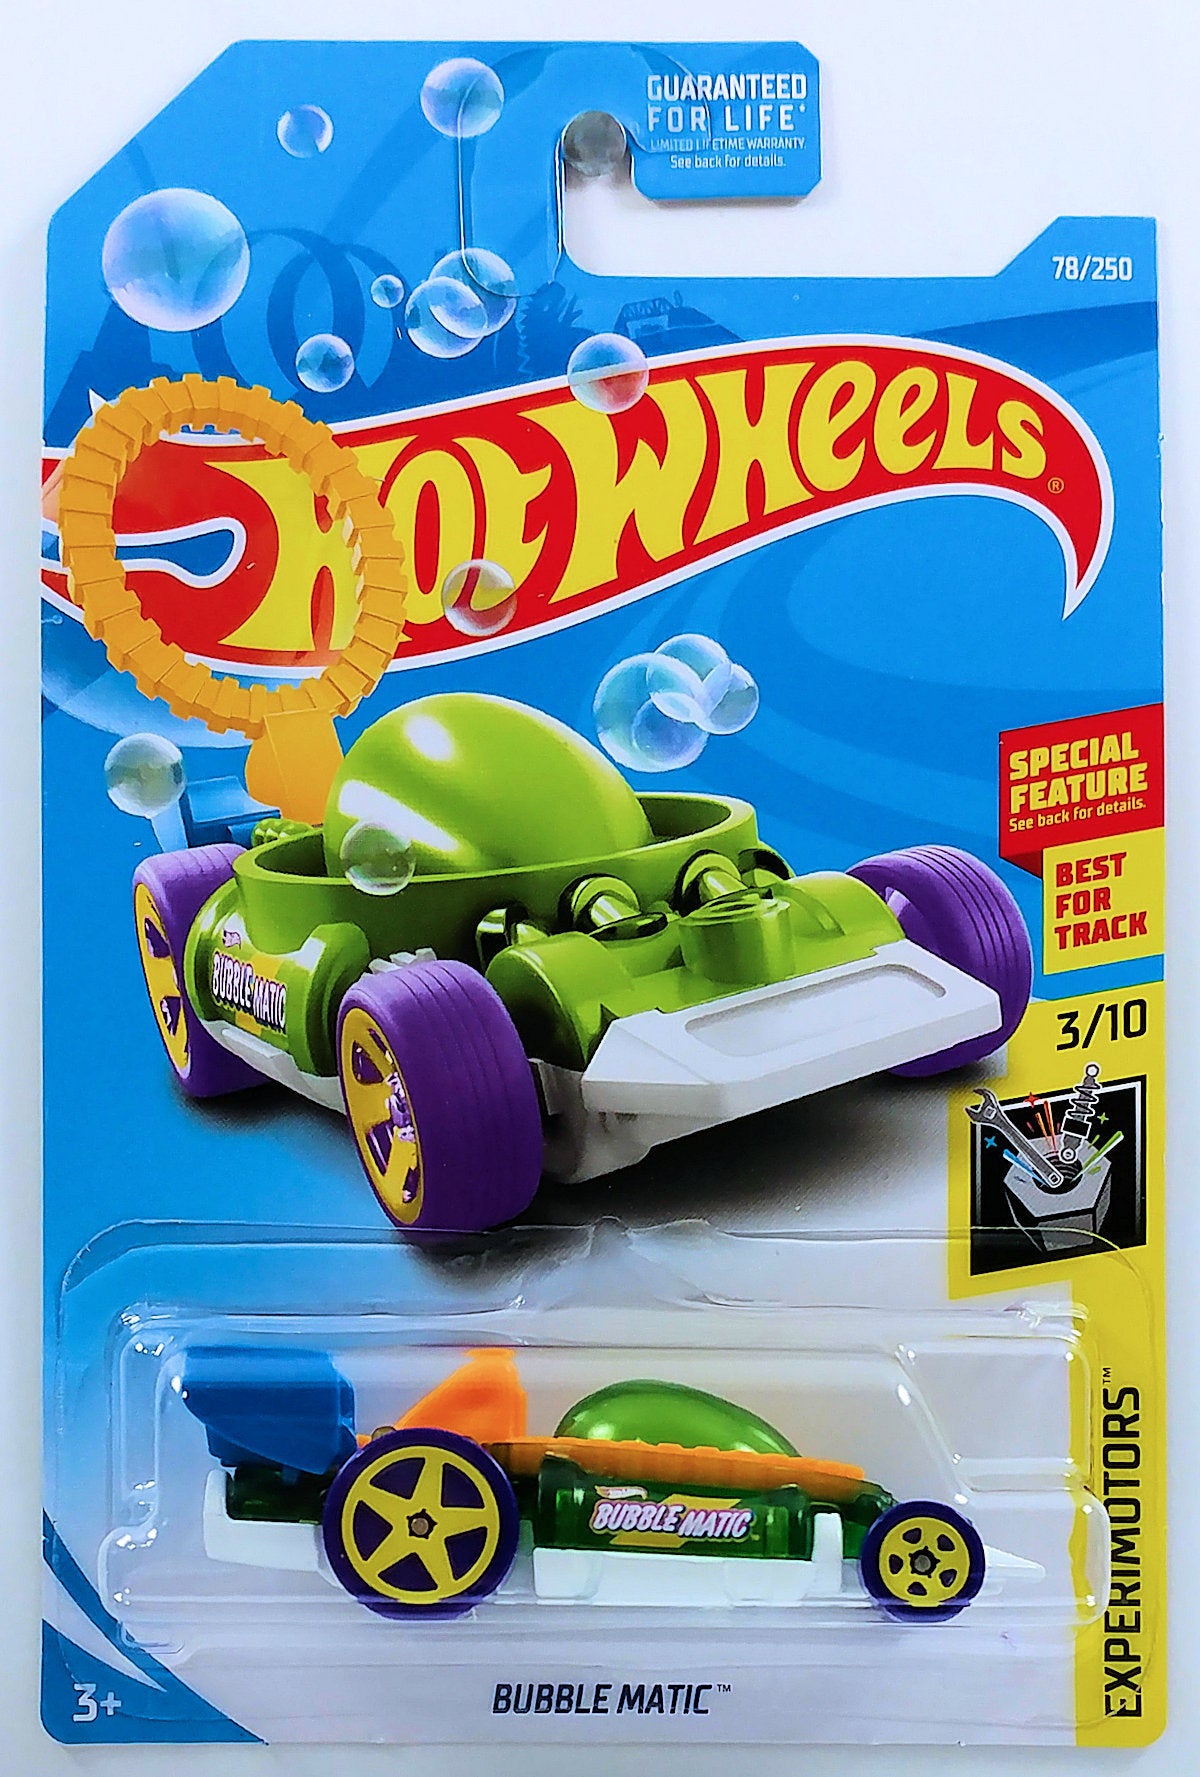 Hot Wheels 2019 - Collector # 078/250 - Bubble Matic